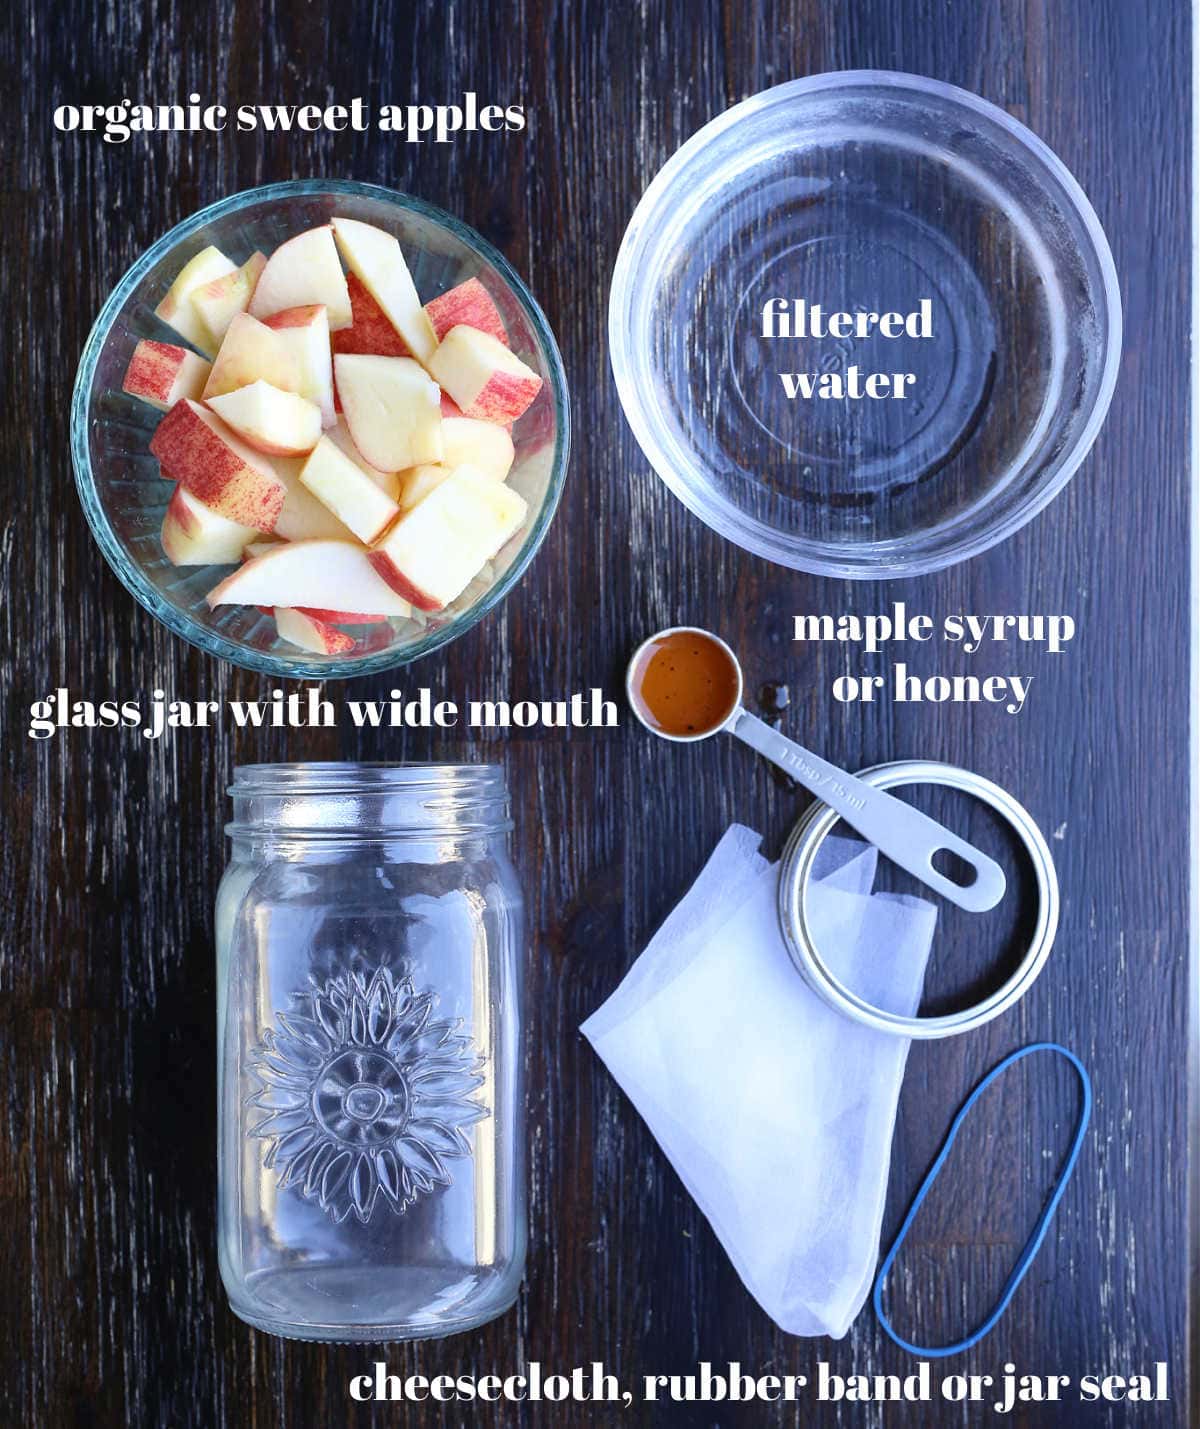 to make acv ingredients of apples water jar cheesecloth and maple syrup